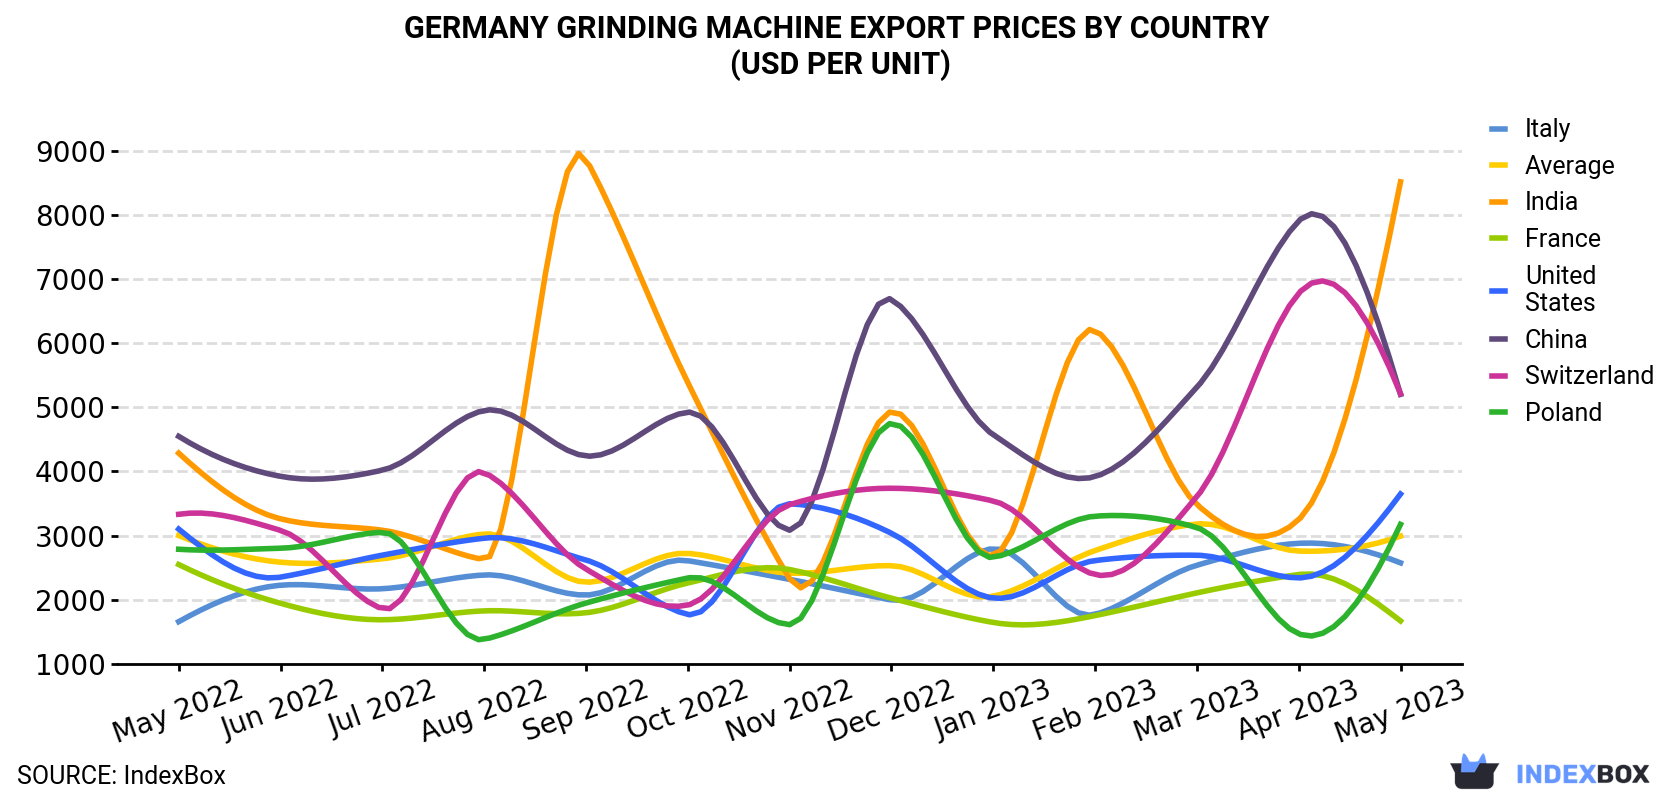 Germany Grinding Machine Export Prices By Country (USD Per Unit)